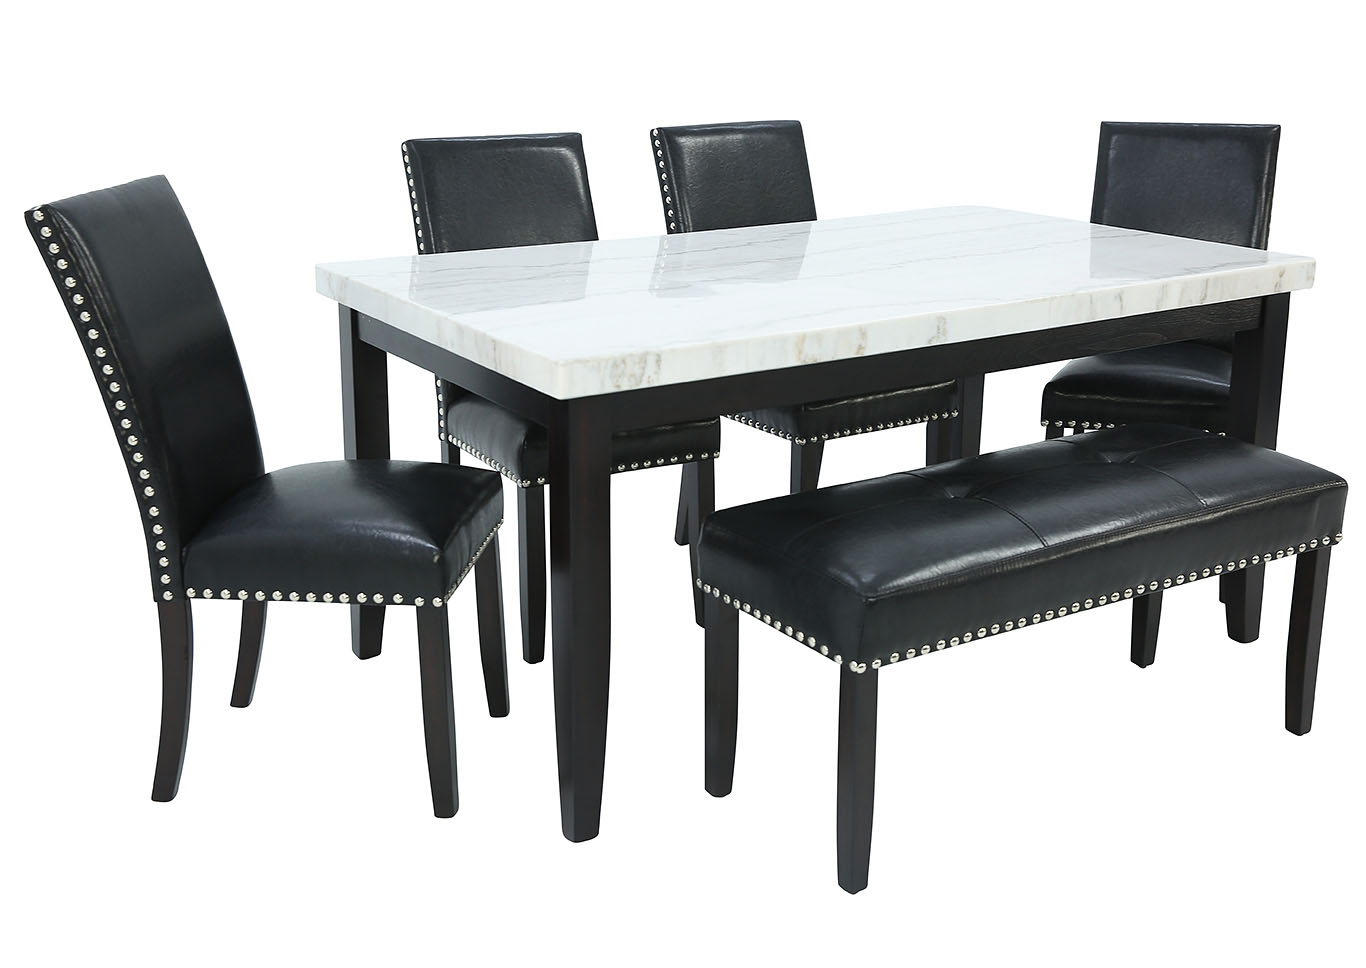 Westby 6 Piece Dining Set Ivan Smith, 6 Piece Black Dining Room Set